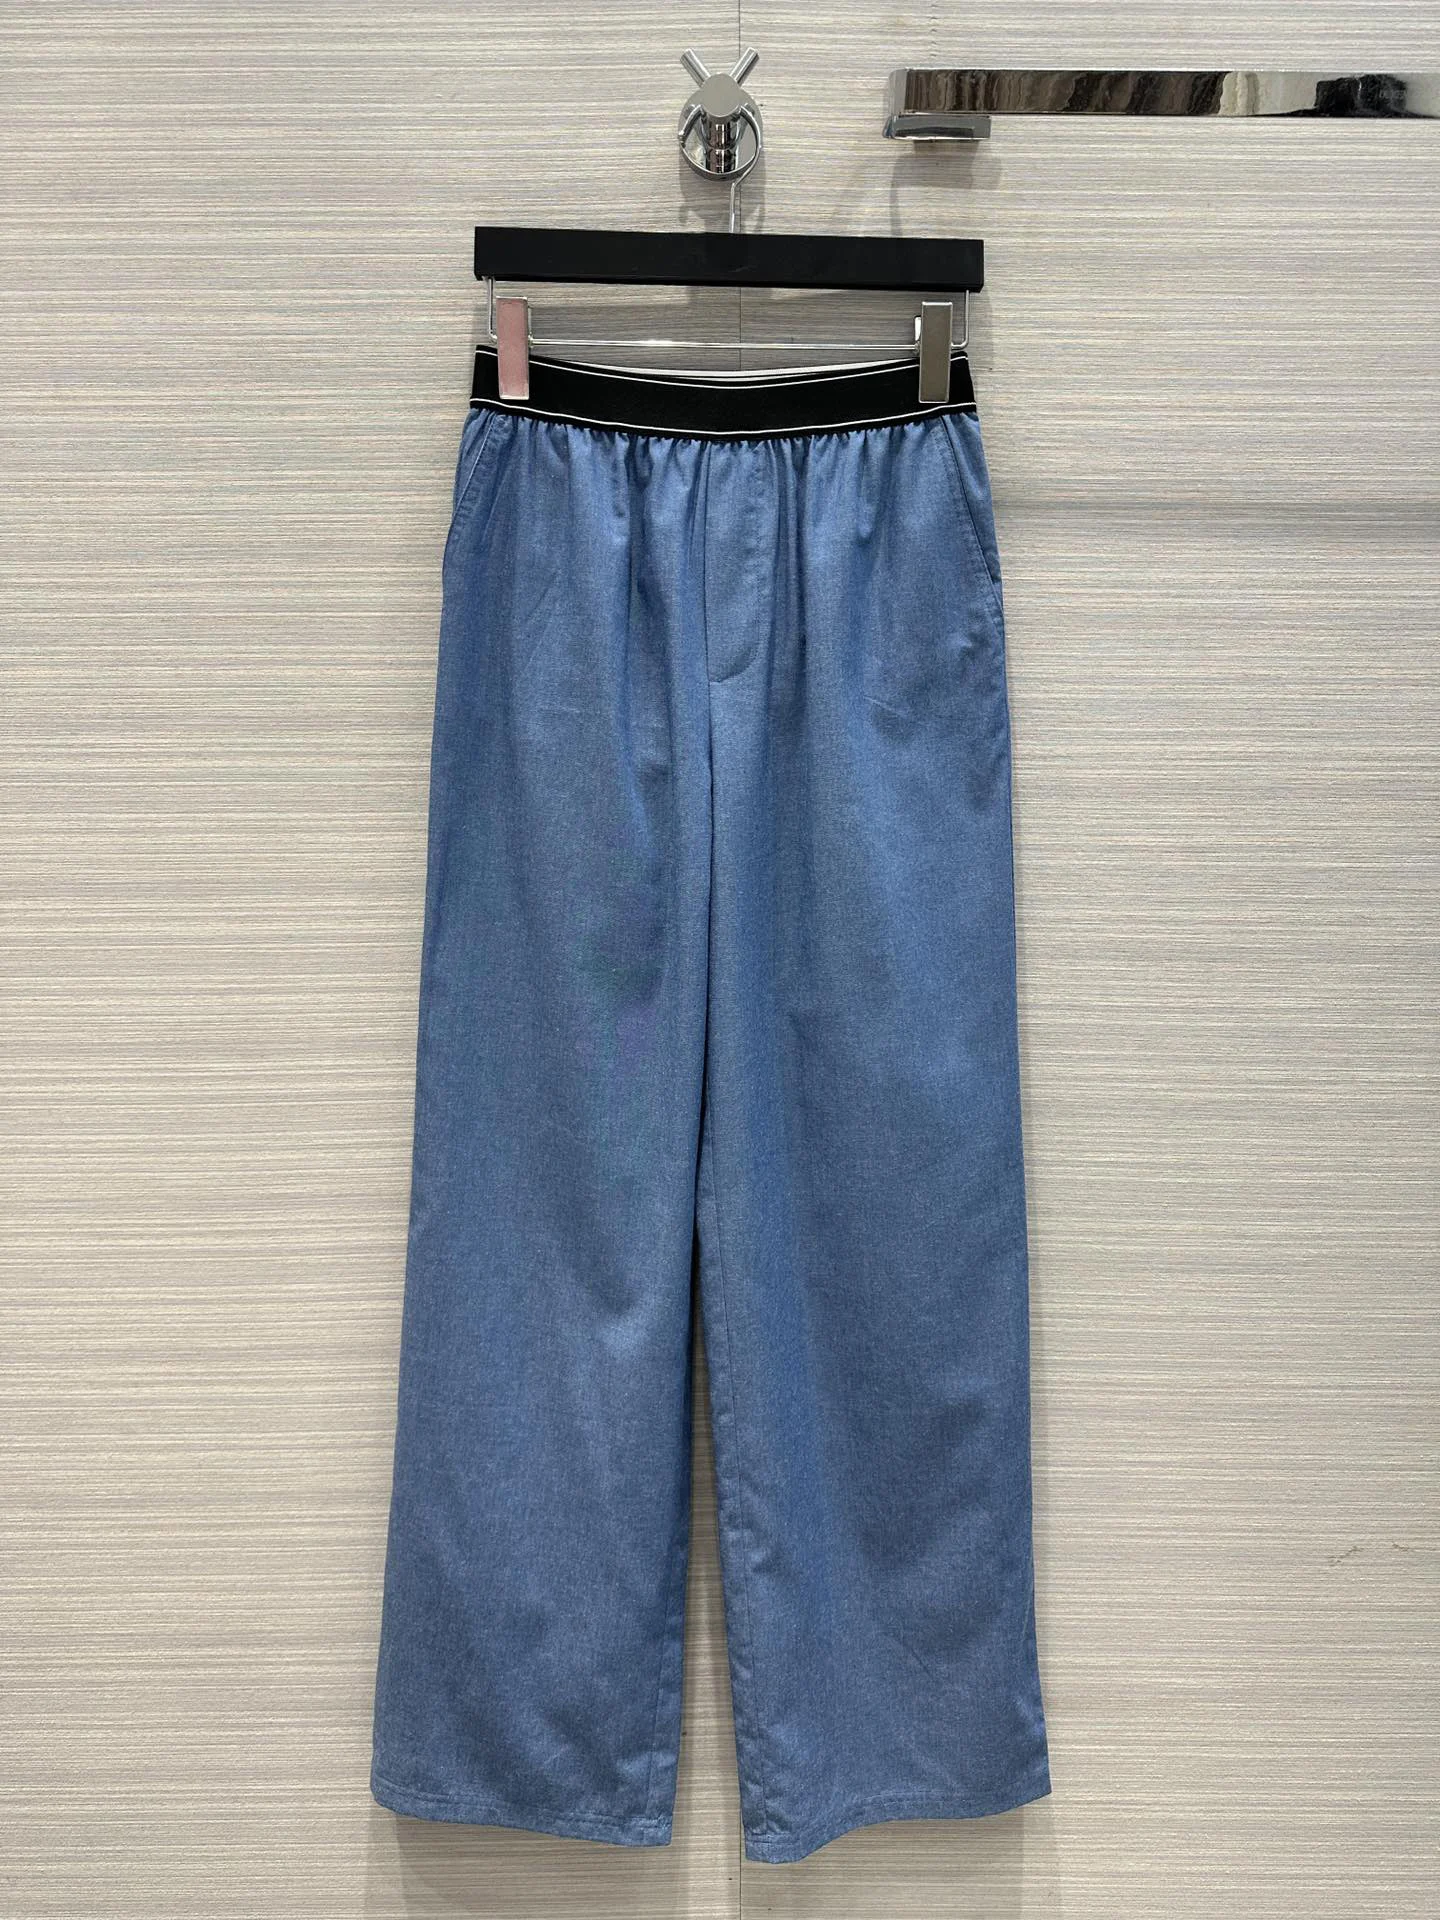 Spring and summer limited new products, webbing waist thin denim wide-leg pants, version of the upper body super thin6.15